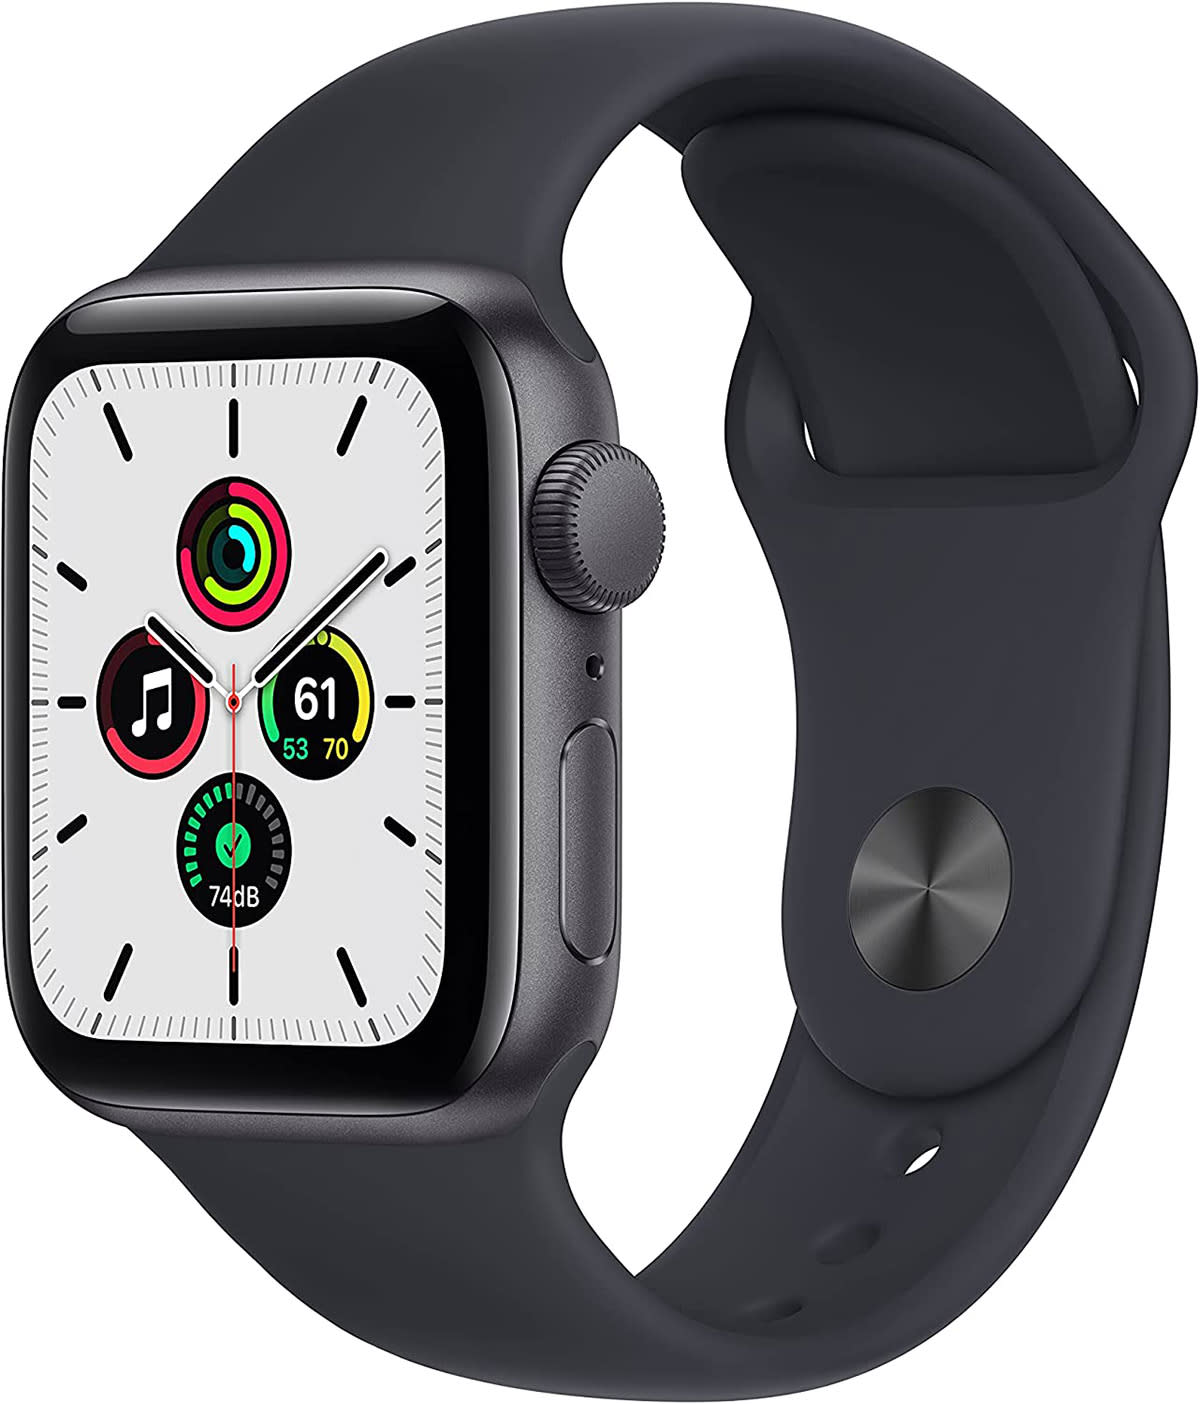 Apple Watch SE with a clock face on the display.